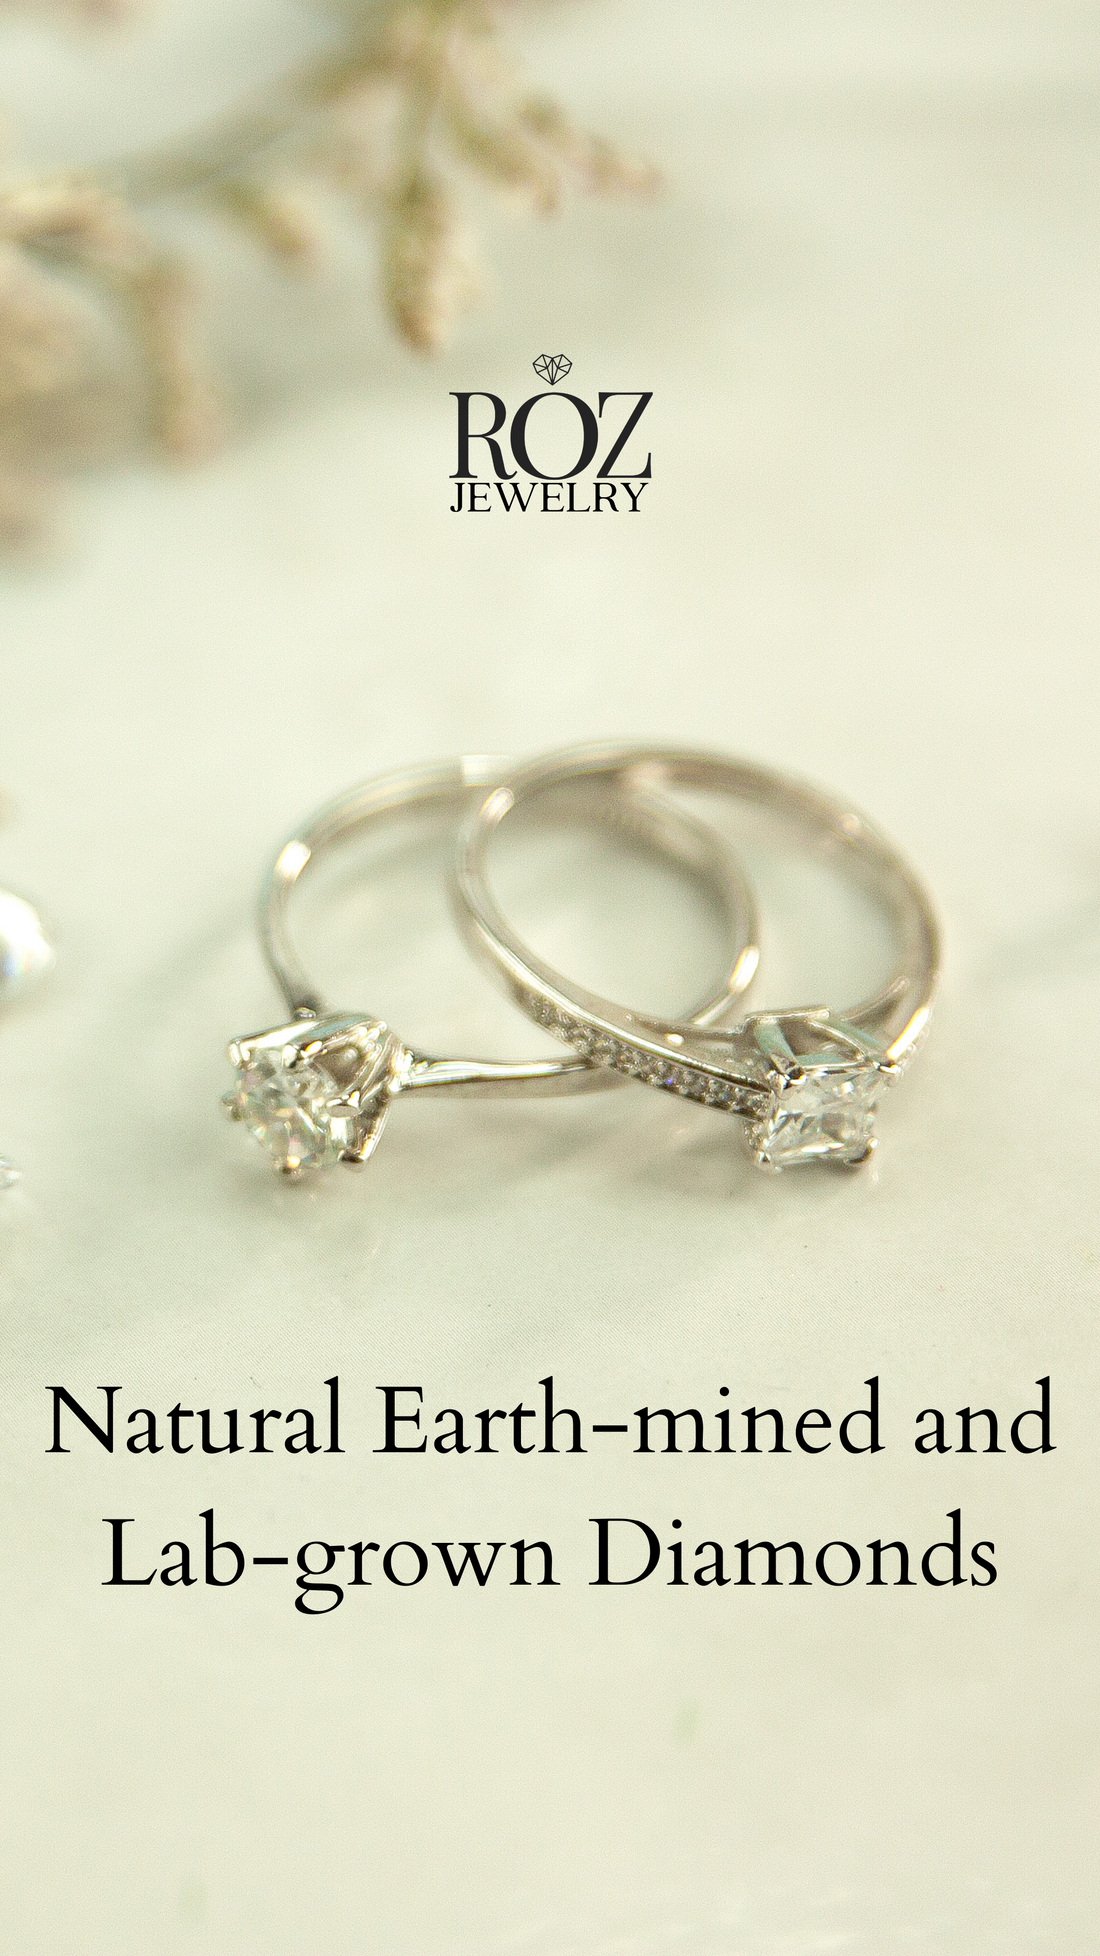 Natural Earth-mined and Lab-grown diamonds